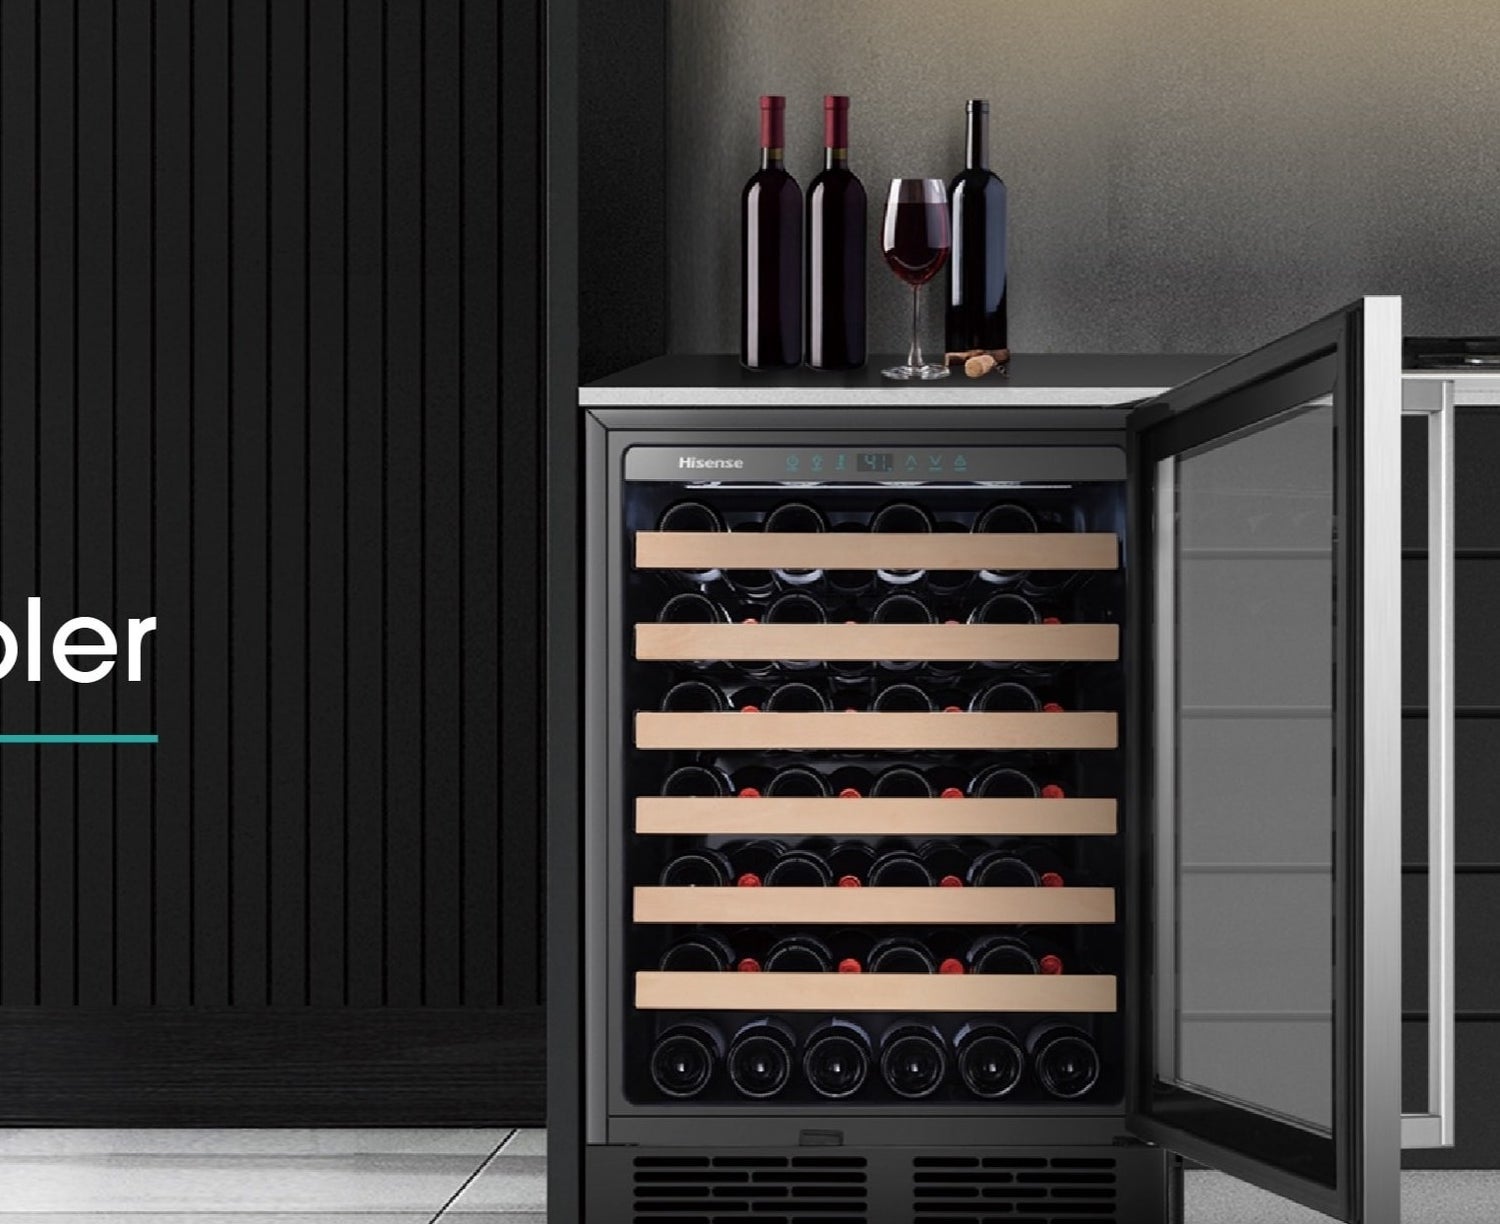 the mini fridge-shaped wine cooler with six tan shelves holding a variety of wine bottles